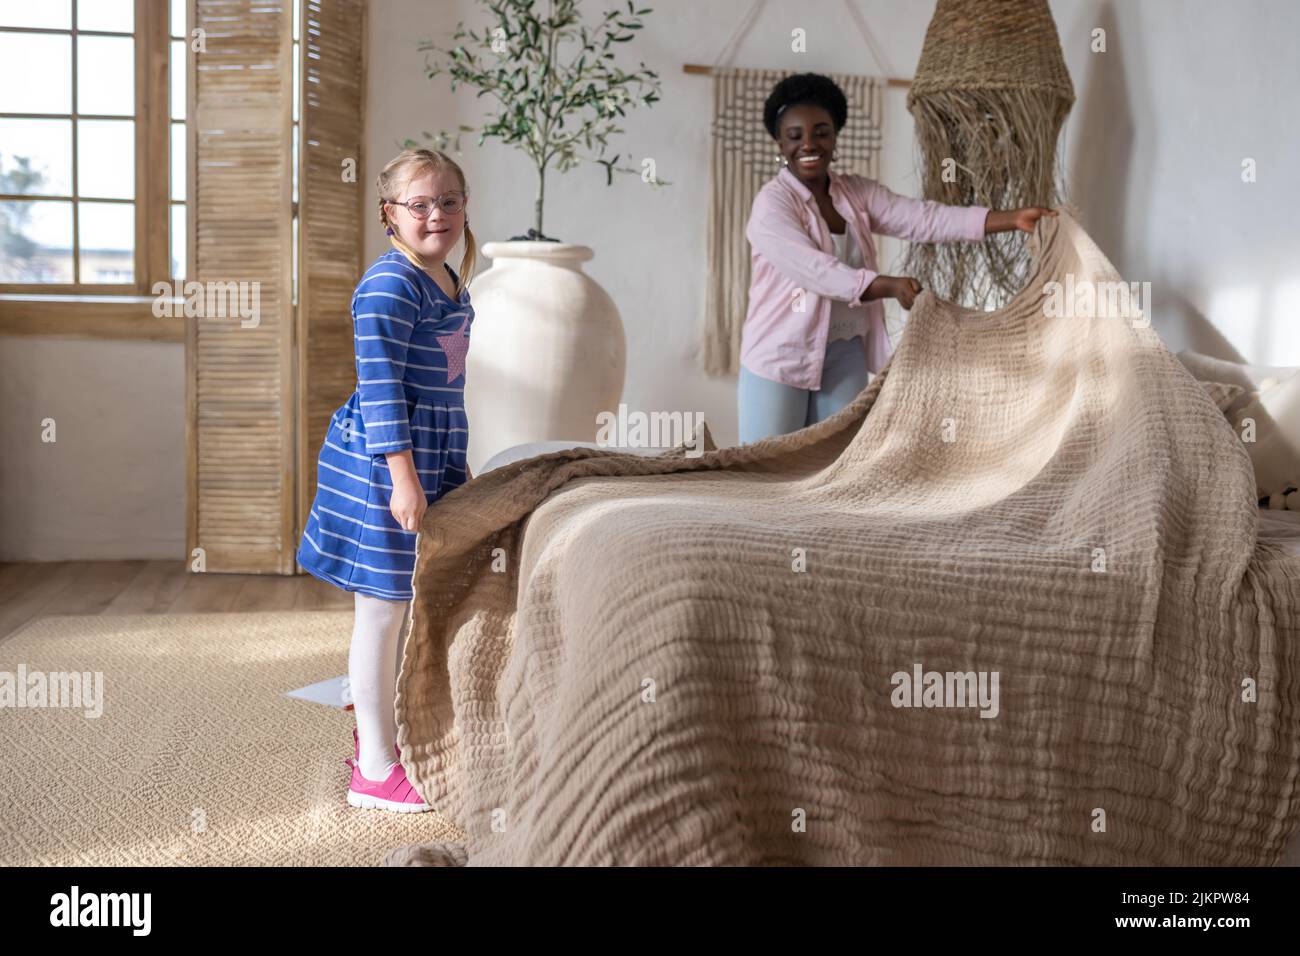 A woman and a girl making bed in the morning Stock Photo